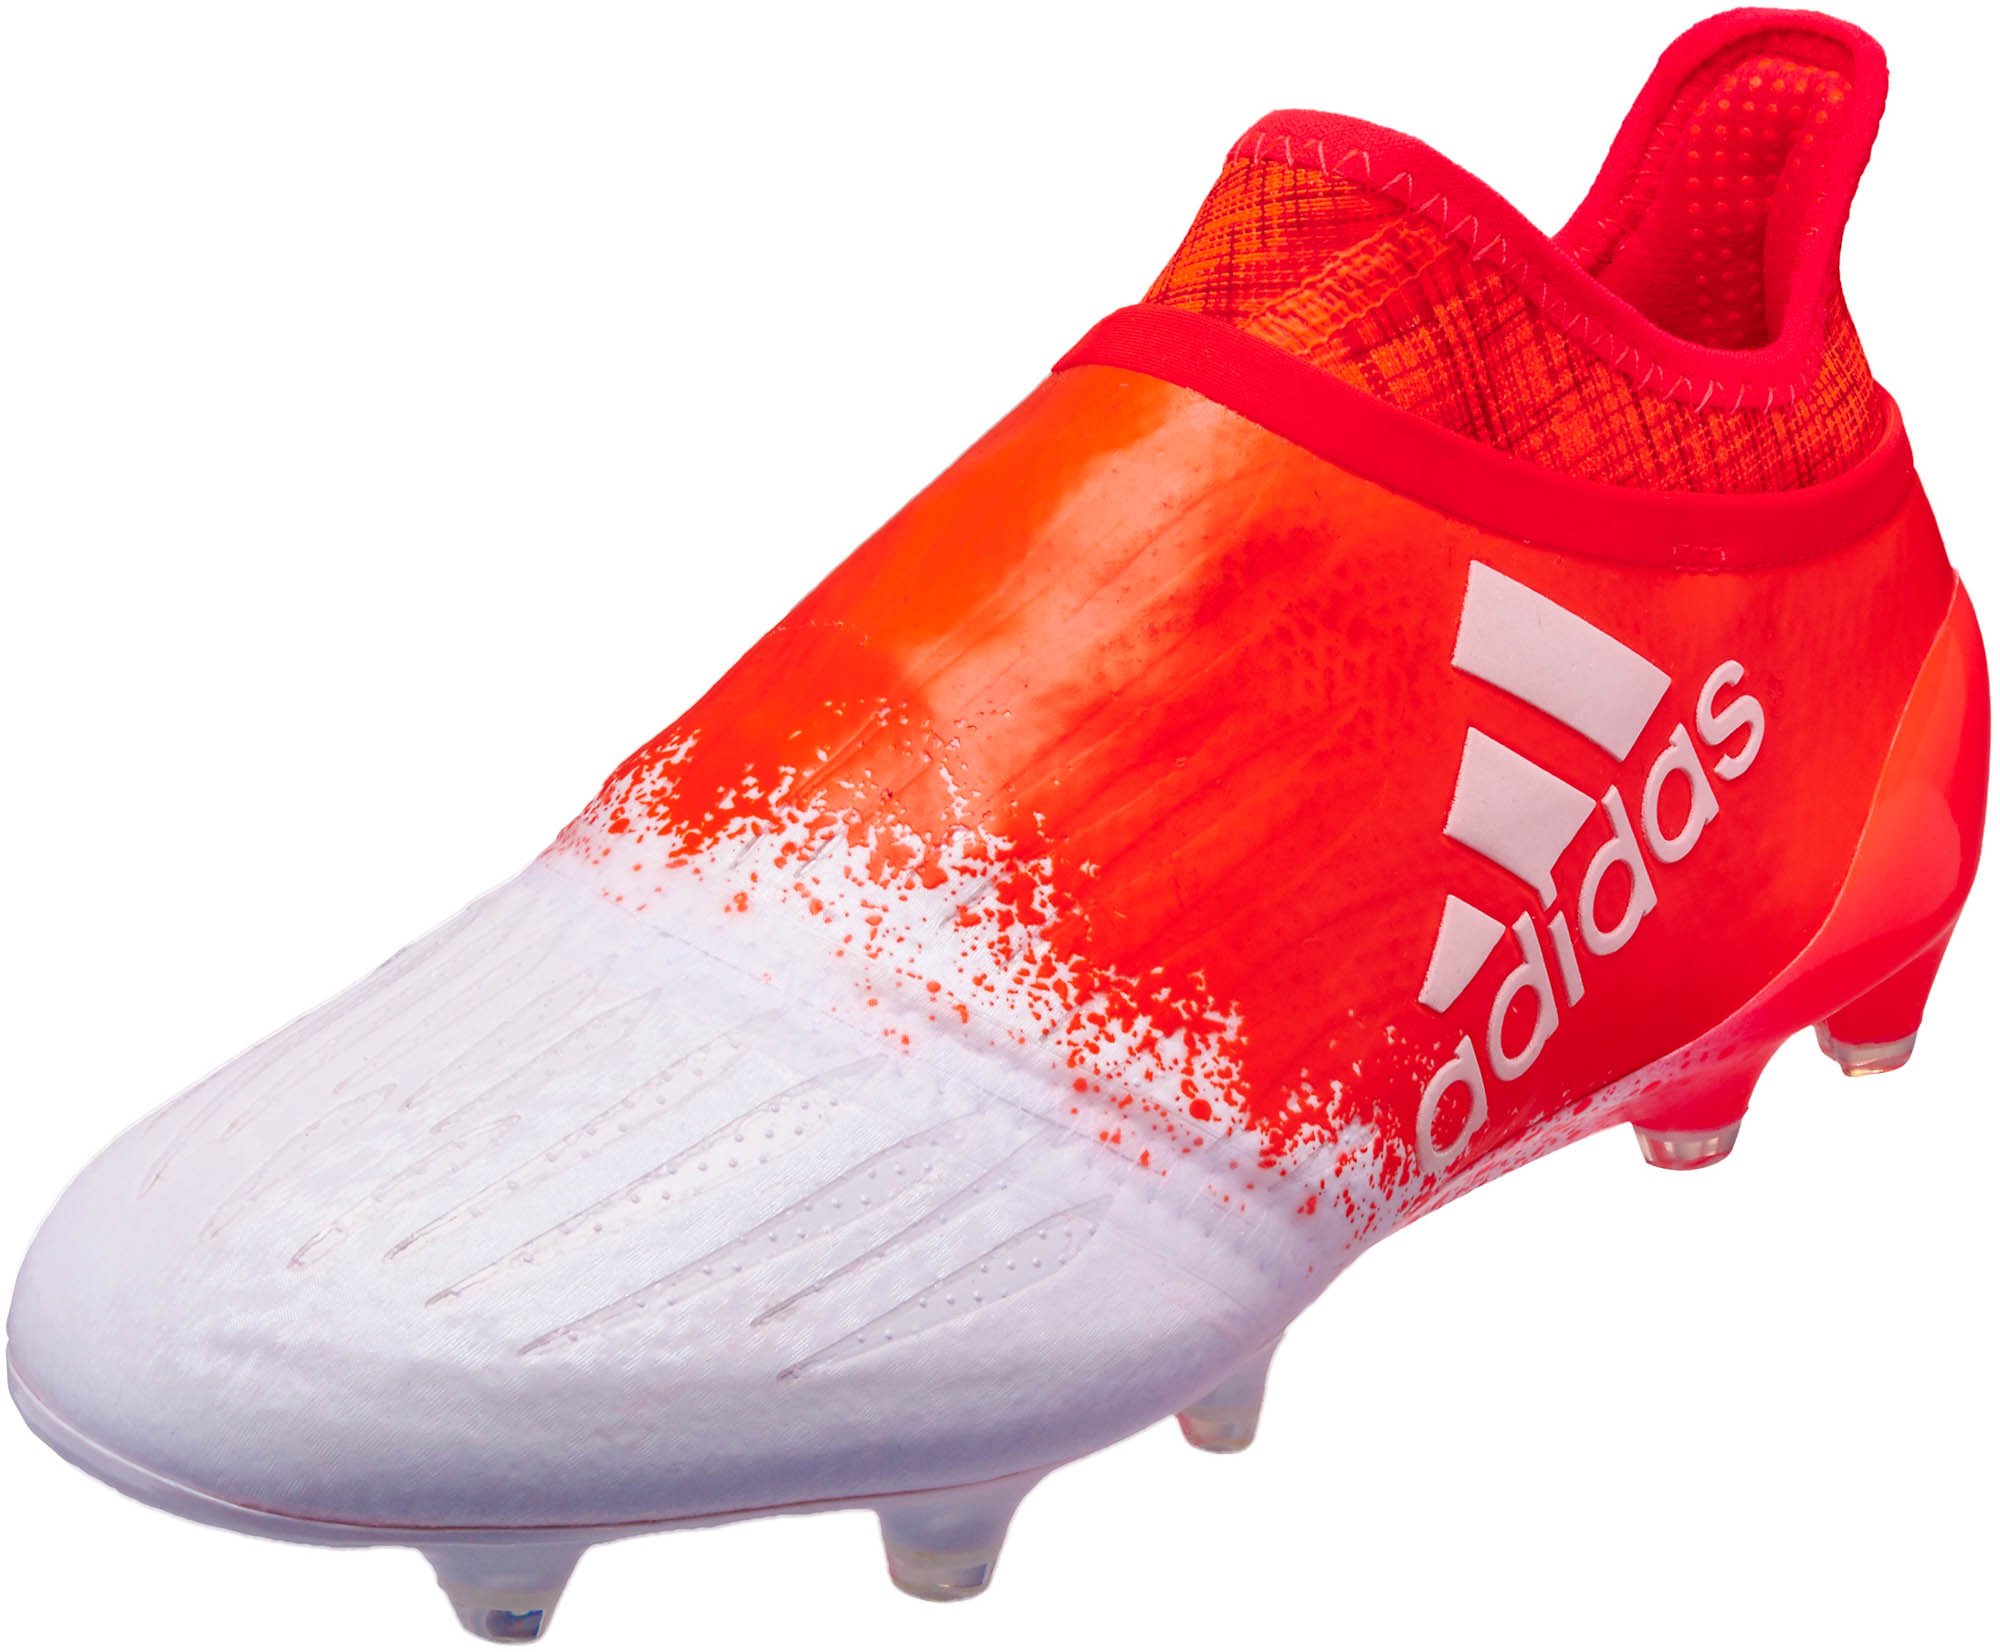 red adidas soccer shoes